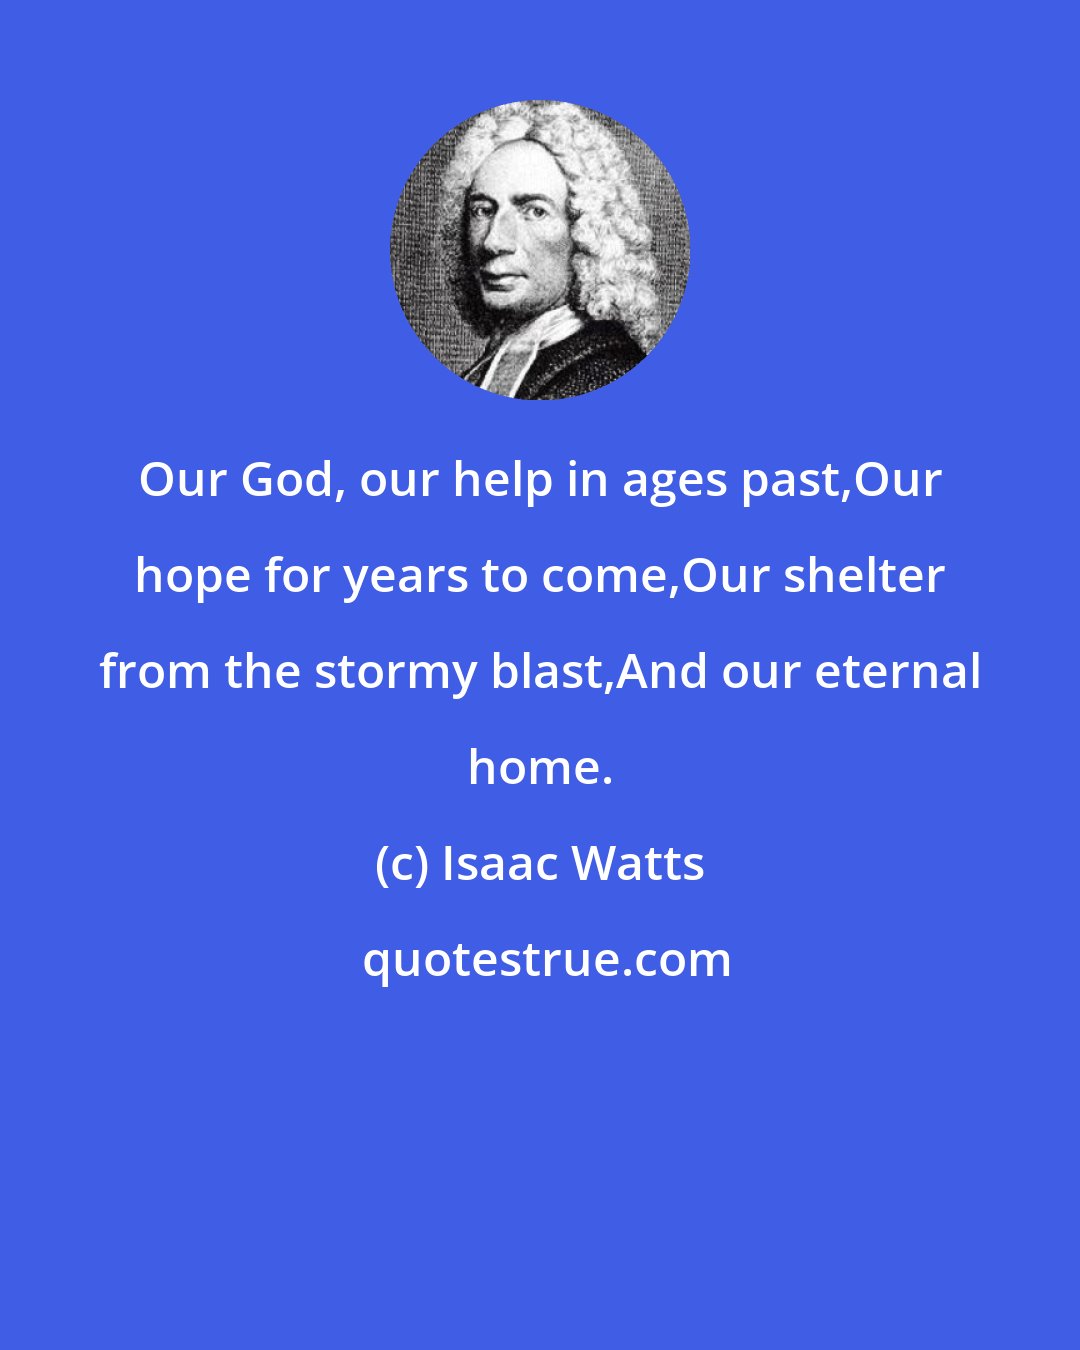 Isaac Watts: Our God, our help in ages past,Our hope for years to come,Our shelter from the stormy blast,And our eternal home.